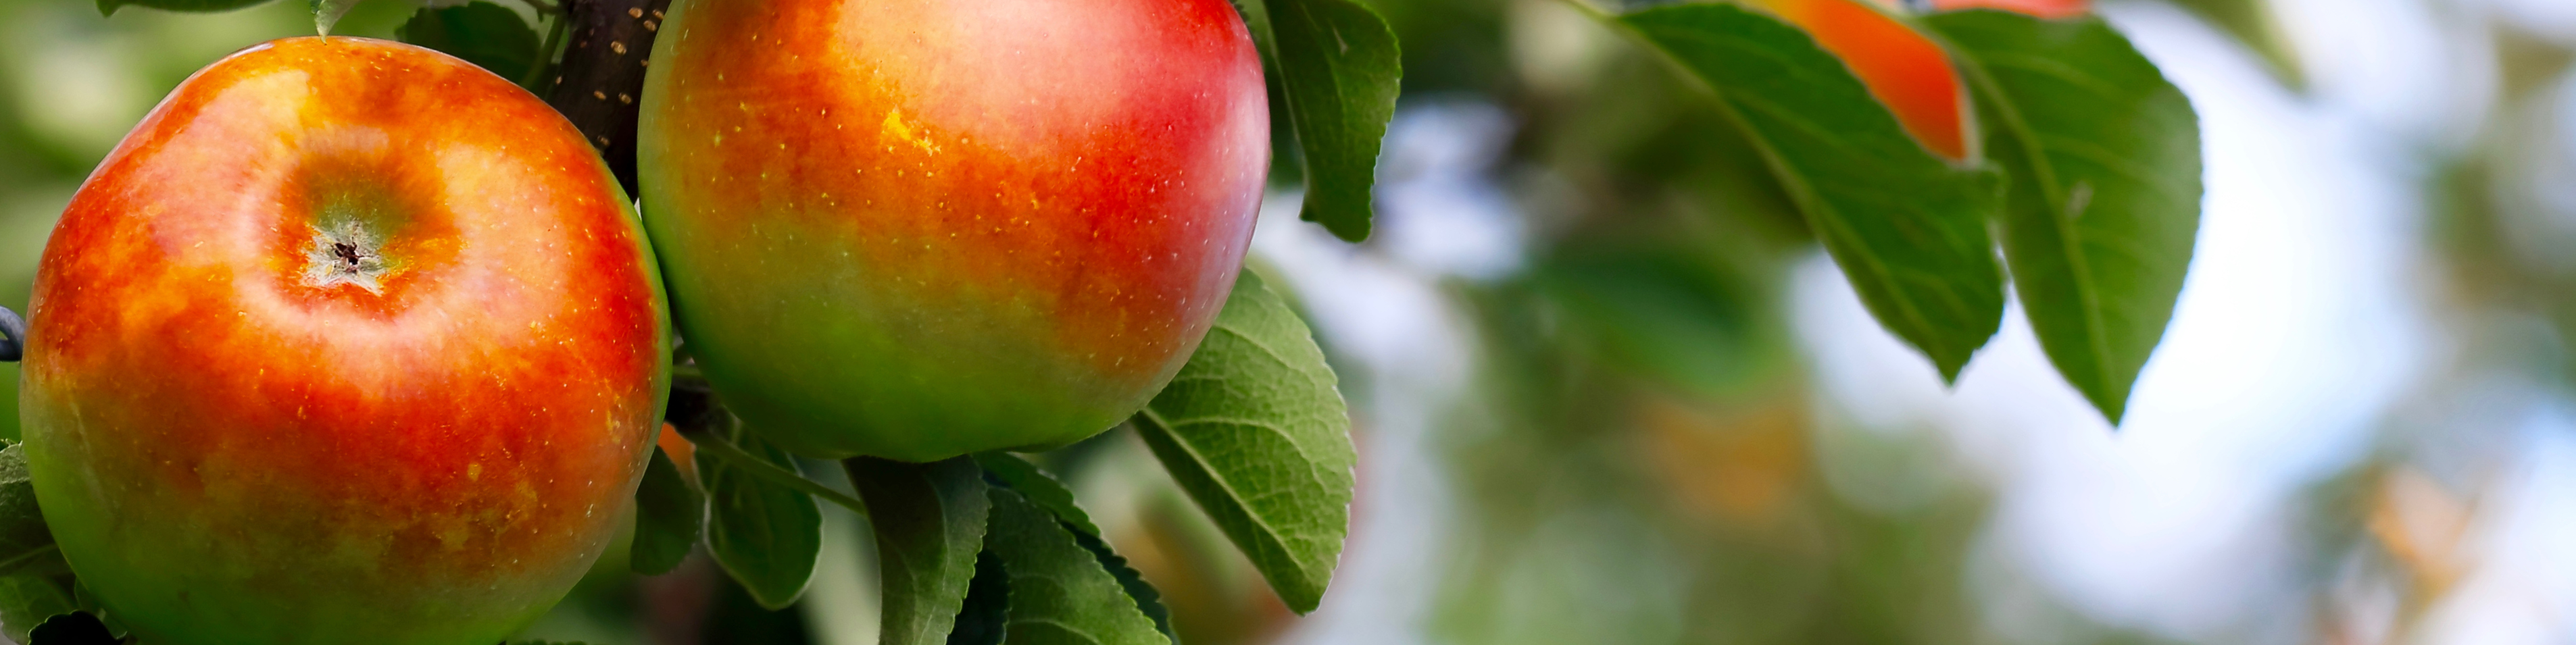 close up of an apple tree with ripe apples